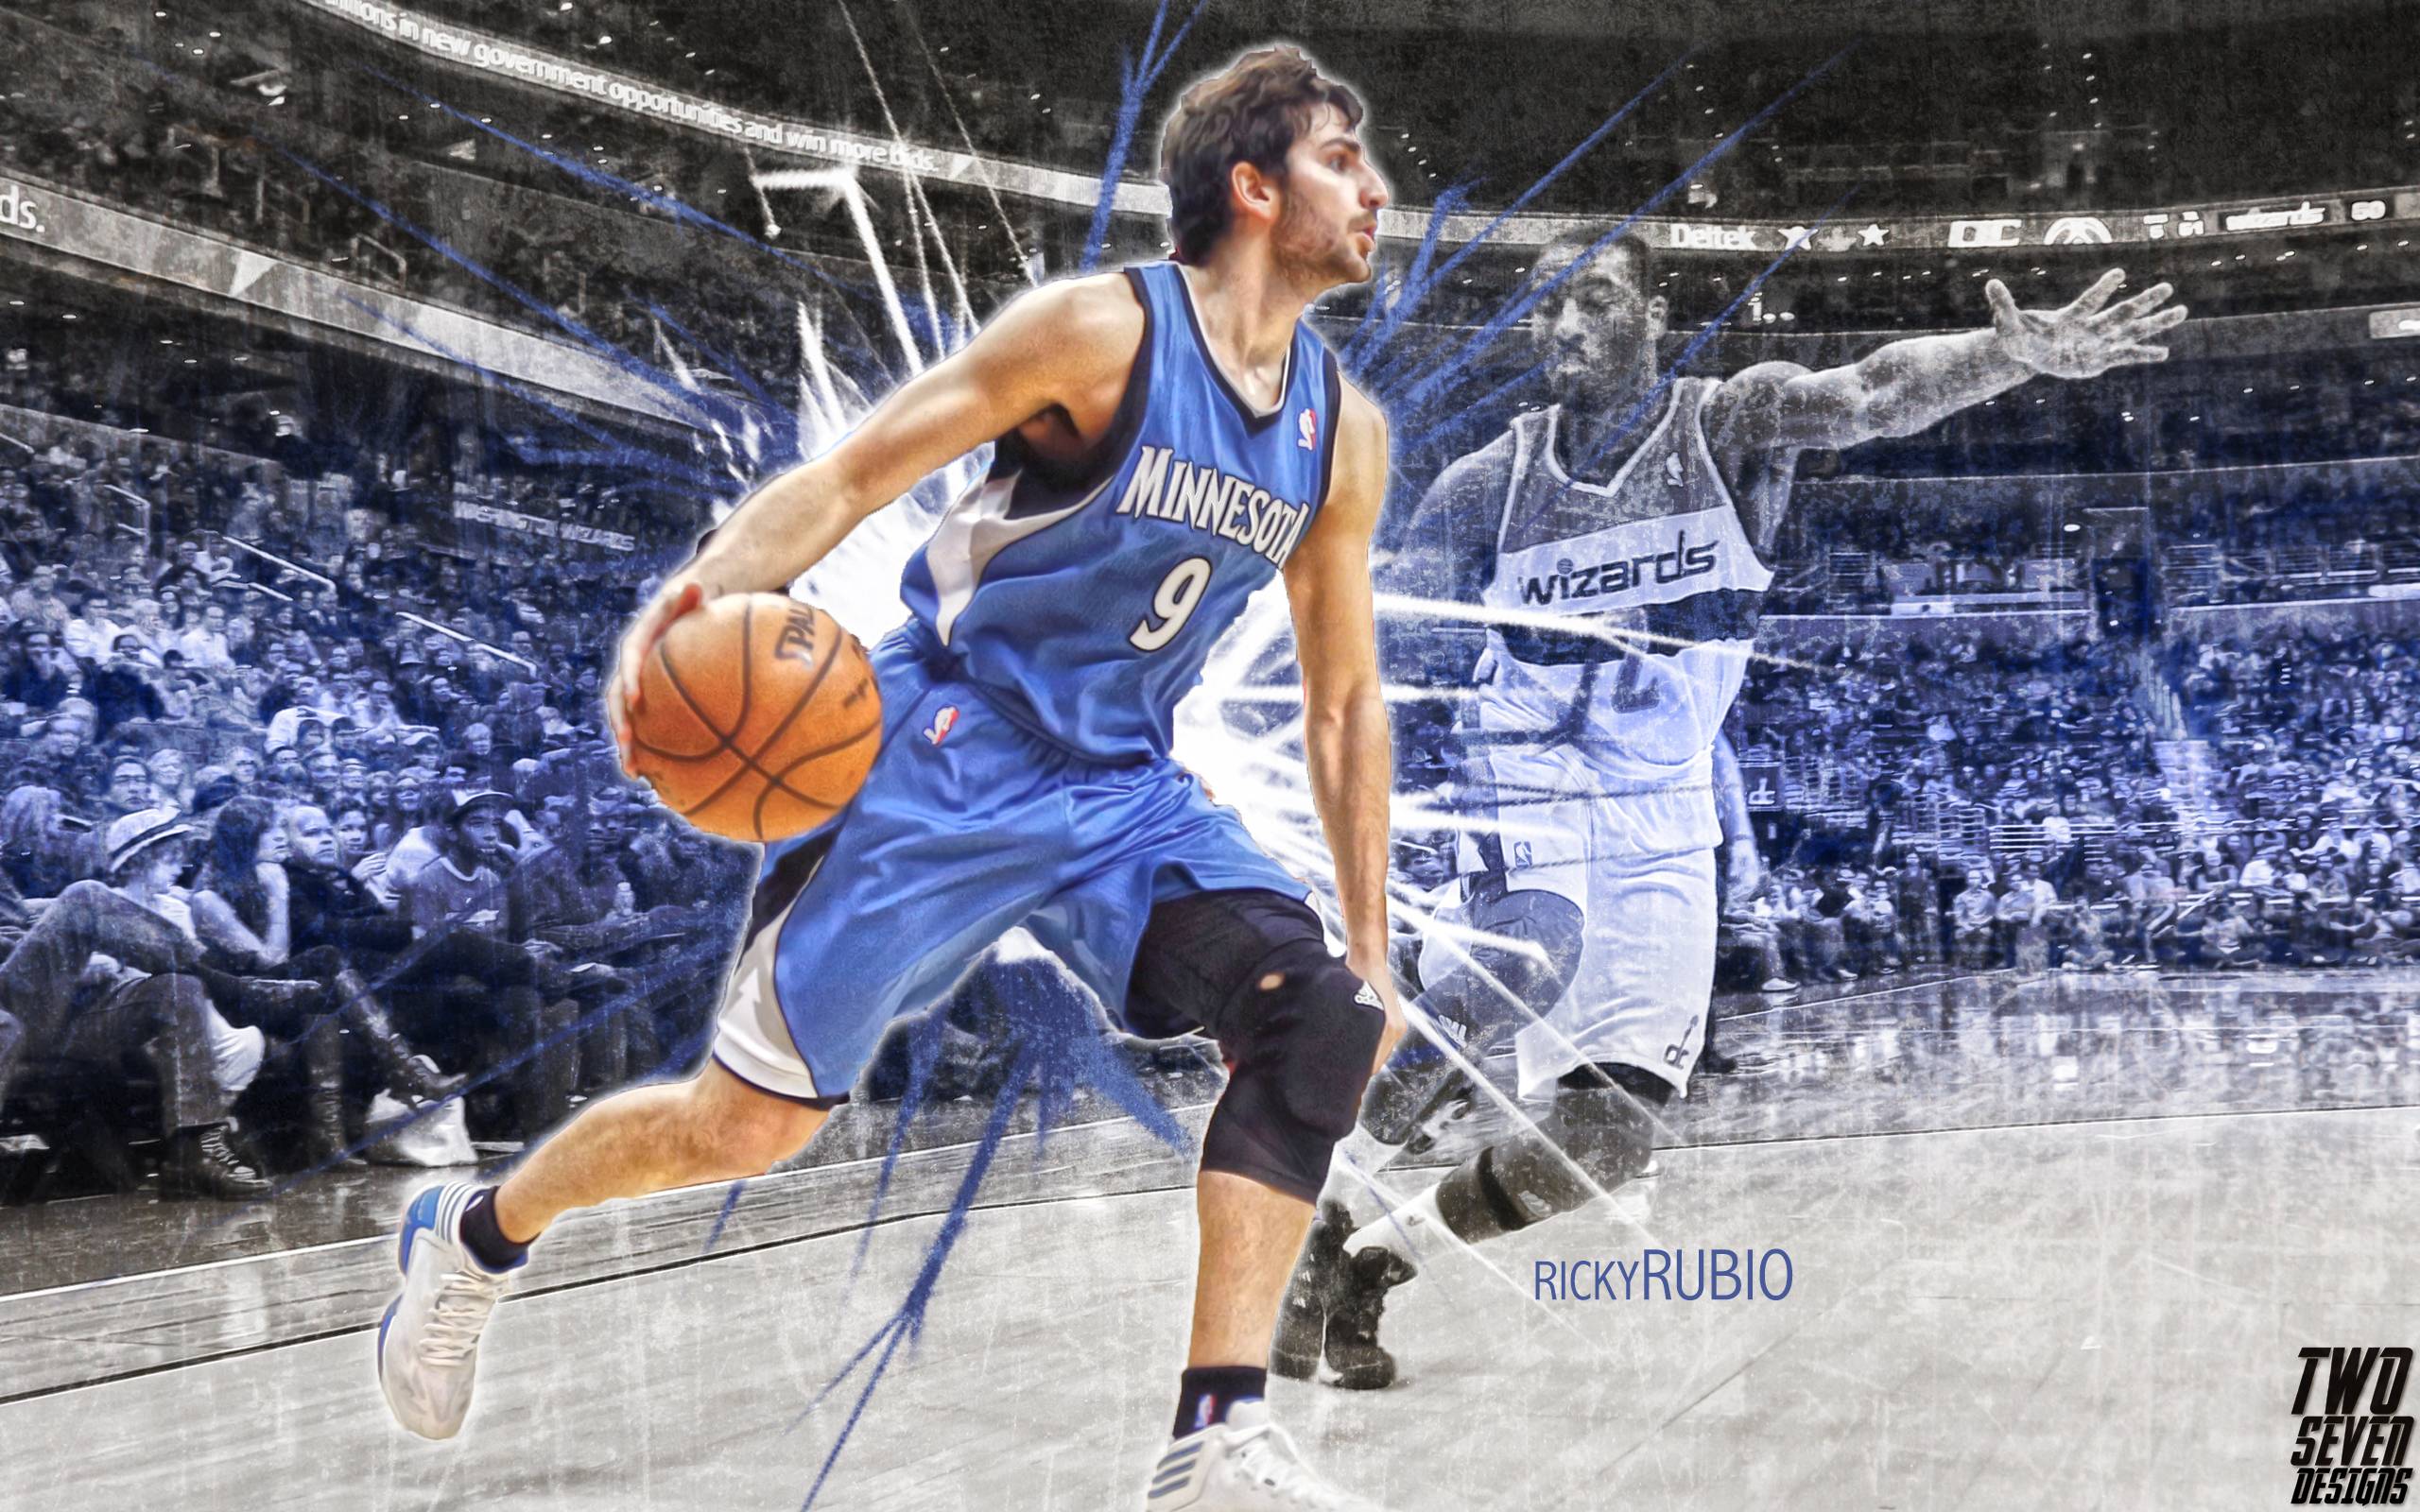 Ricky Rubio Basketball Player Profile & Images - Sports Players